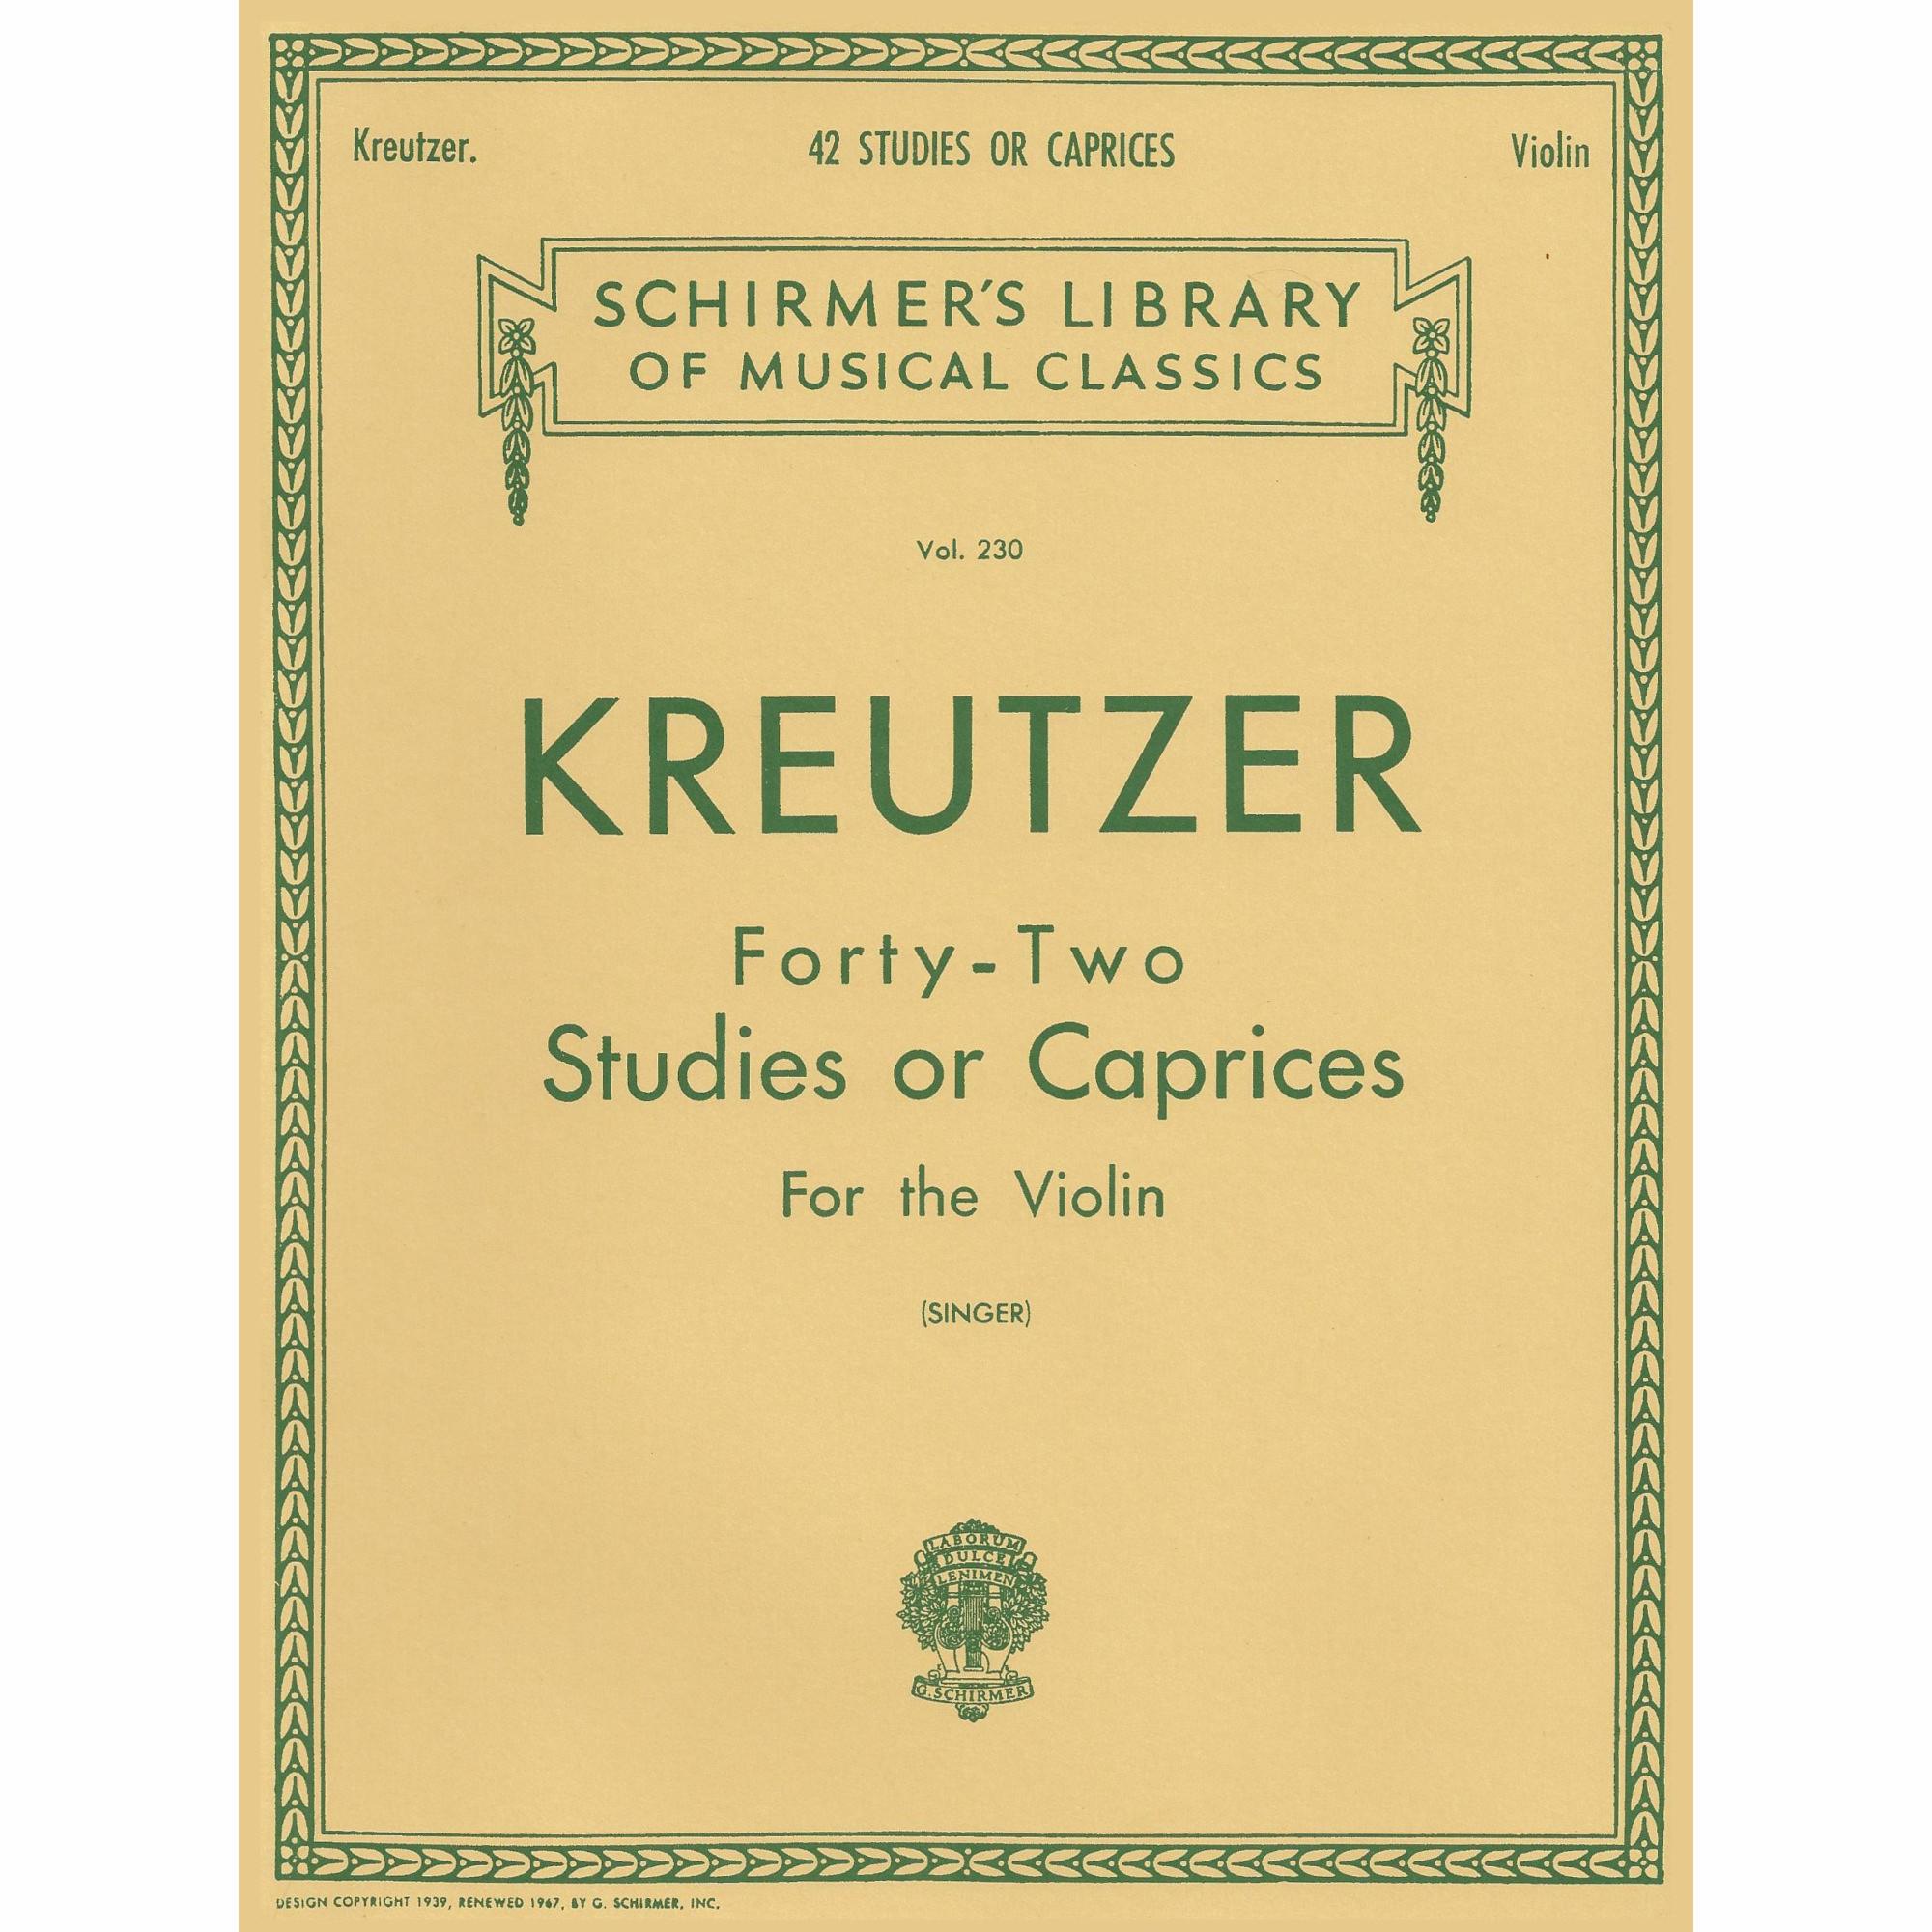 Kreutzer -- Forty-Two Studies or Caprices for Violin